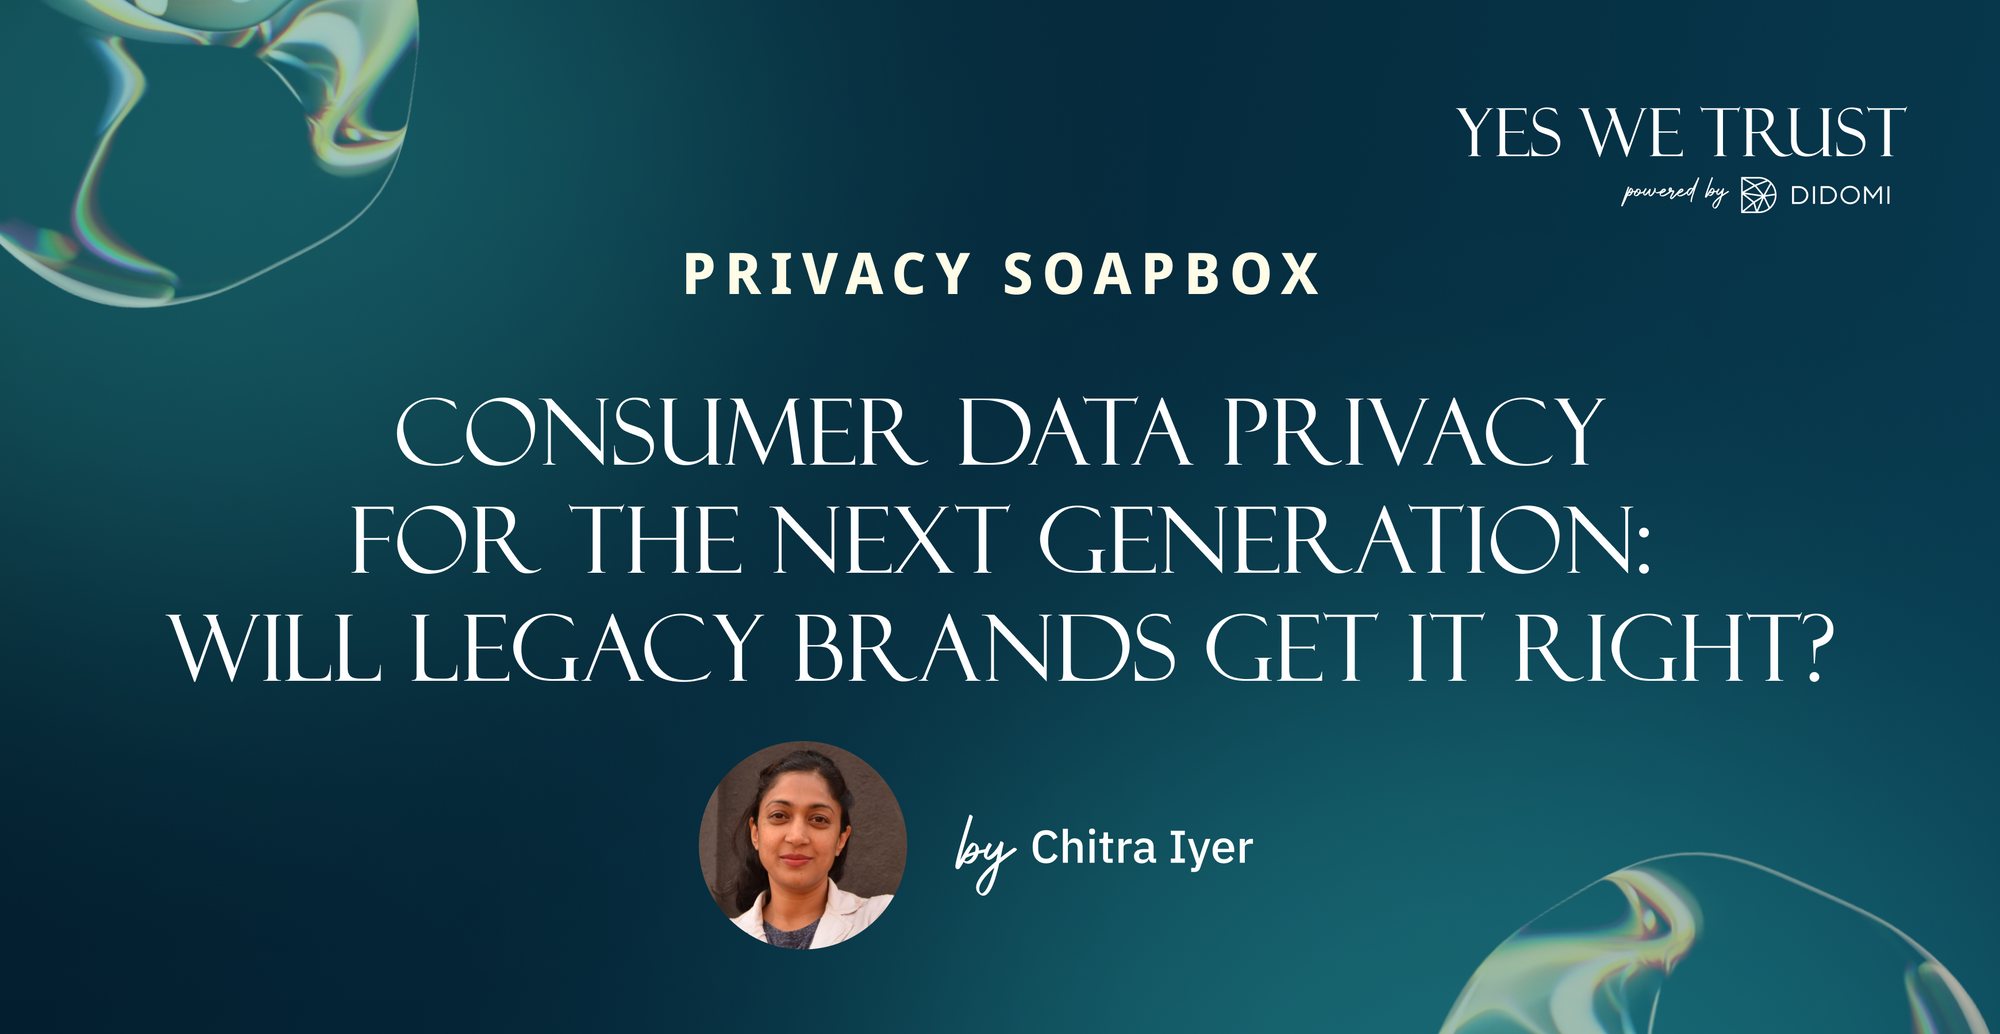 Consumer data privacy for the next generation: will legacy brands get it right?